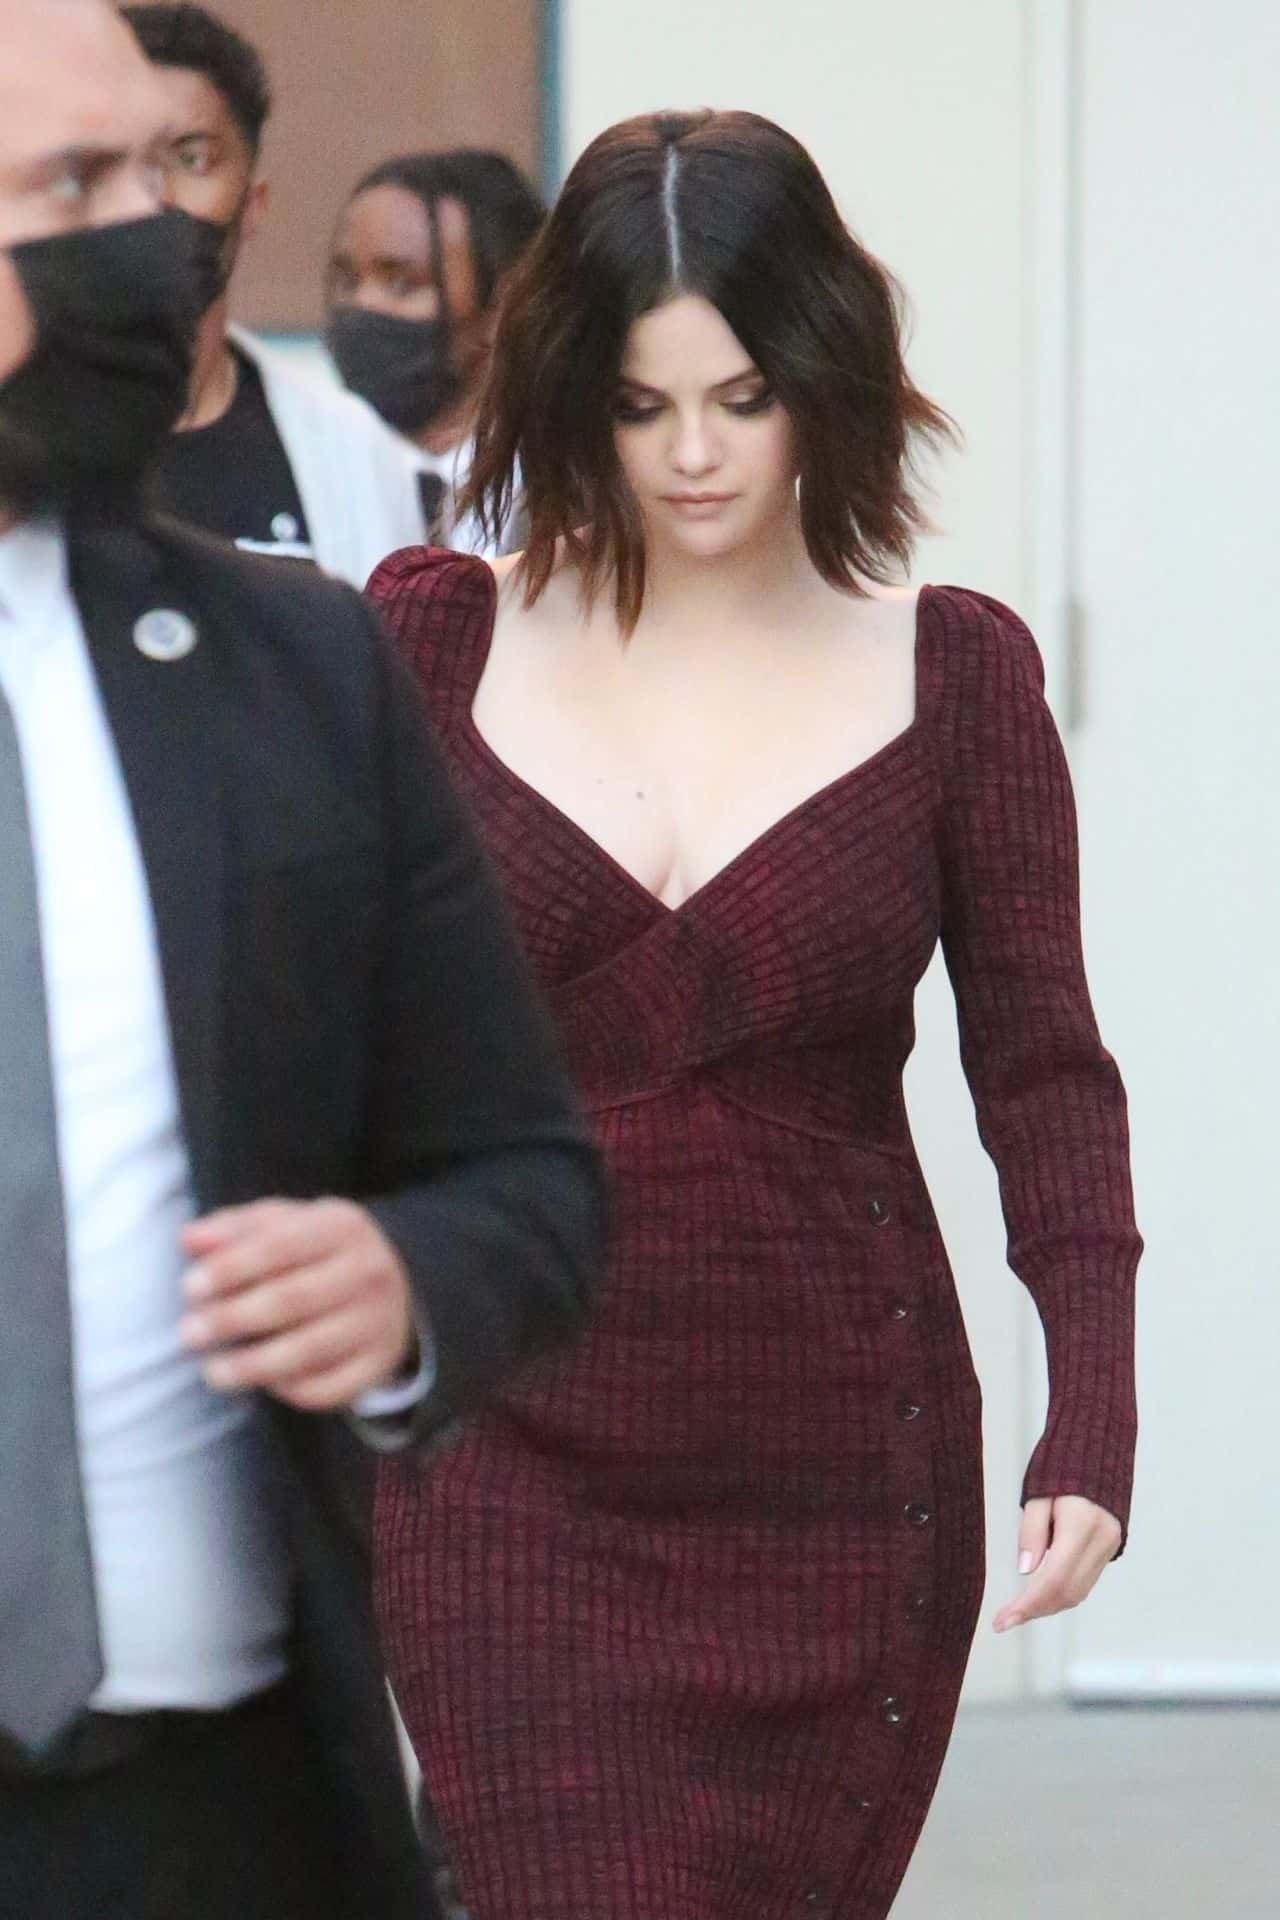 Selena Gomez Signs Autographs and Poses in a Beautiful Burgundy Dress in LA